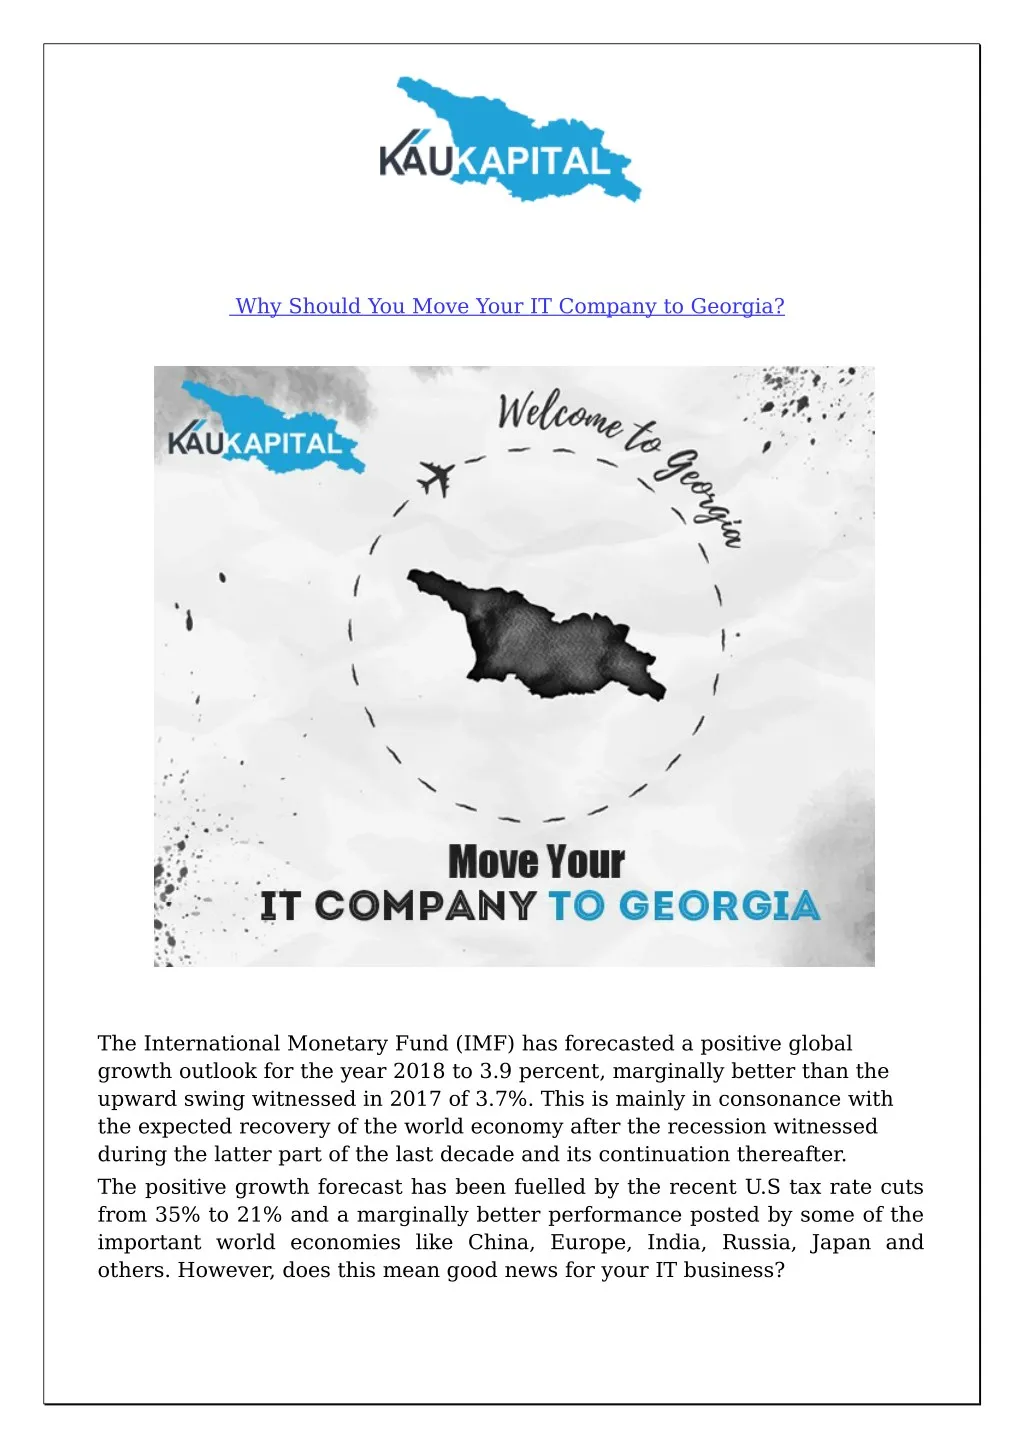 why should you move your it company to georgia